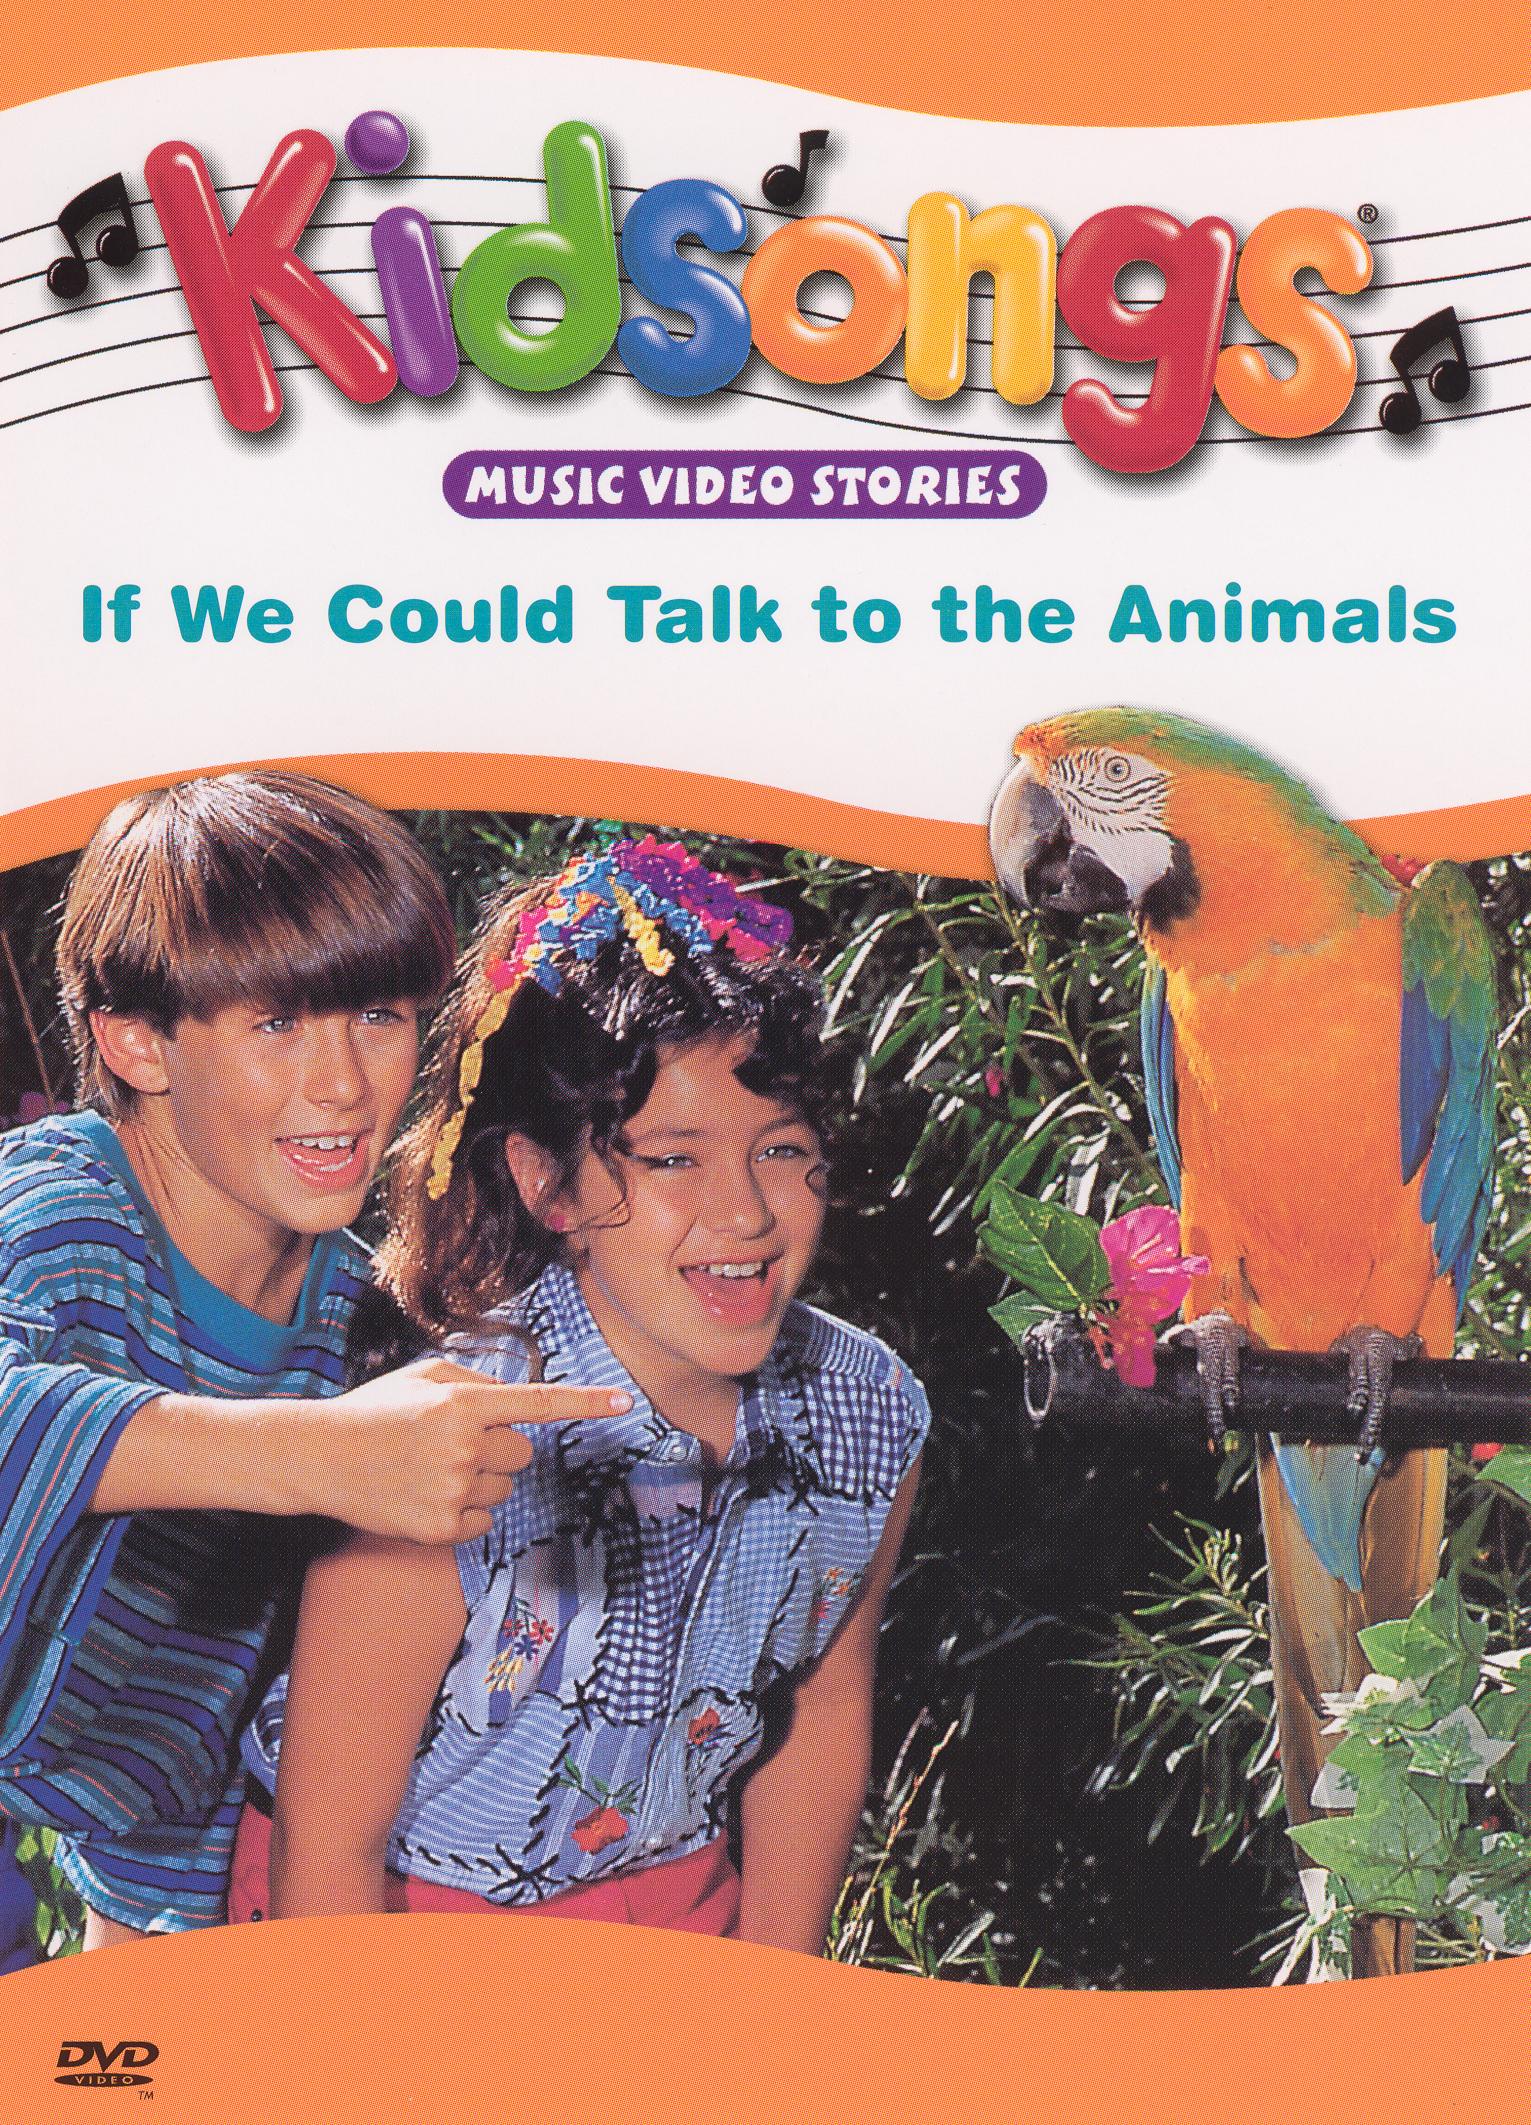 Kidsongs: If We Could Talk to the Animals [DVD] [1993] - Best Buy